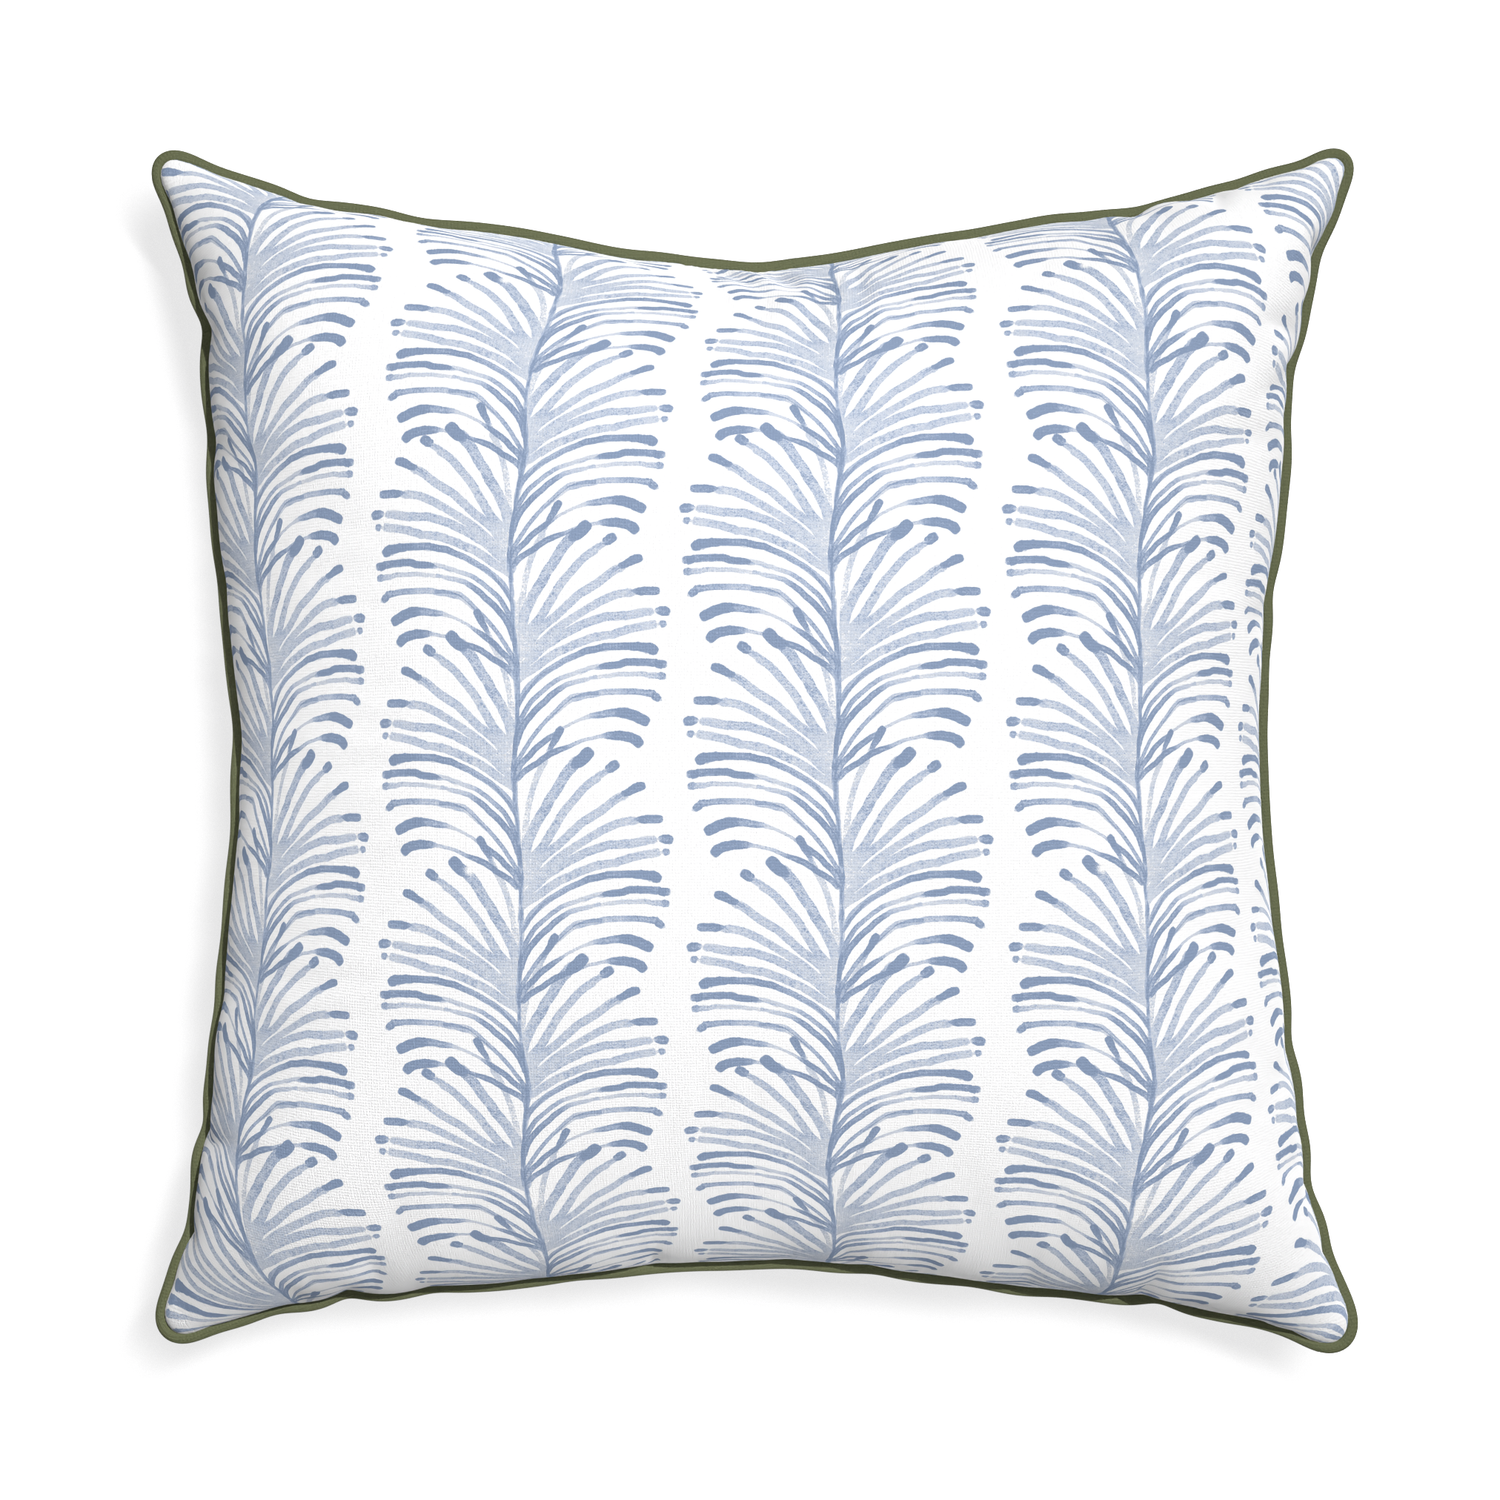 Euro-sham emma sky custom pillow with f piping on white background